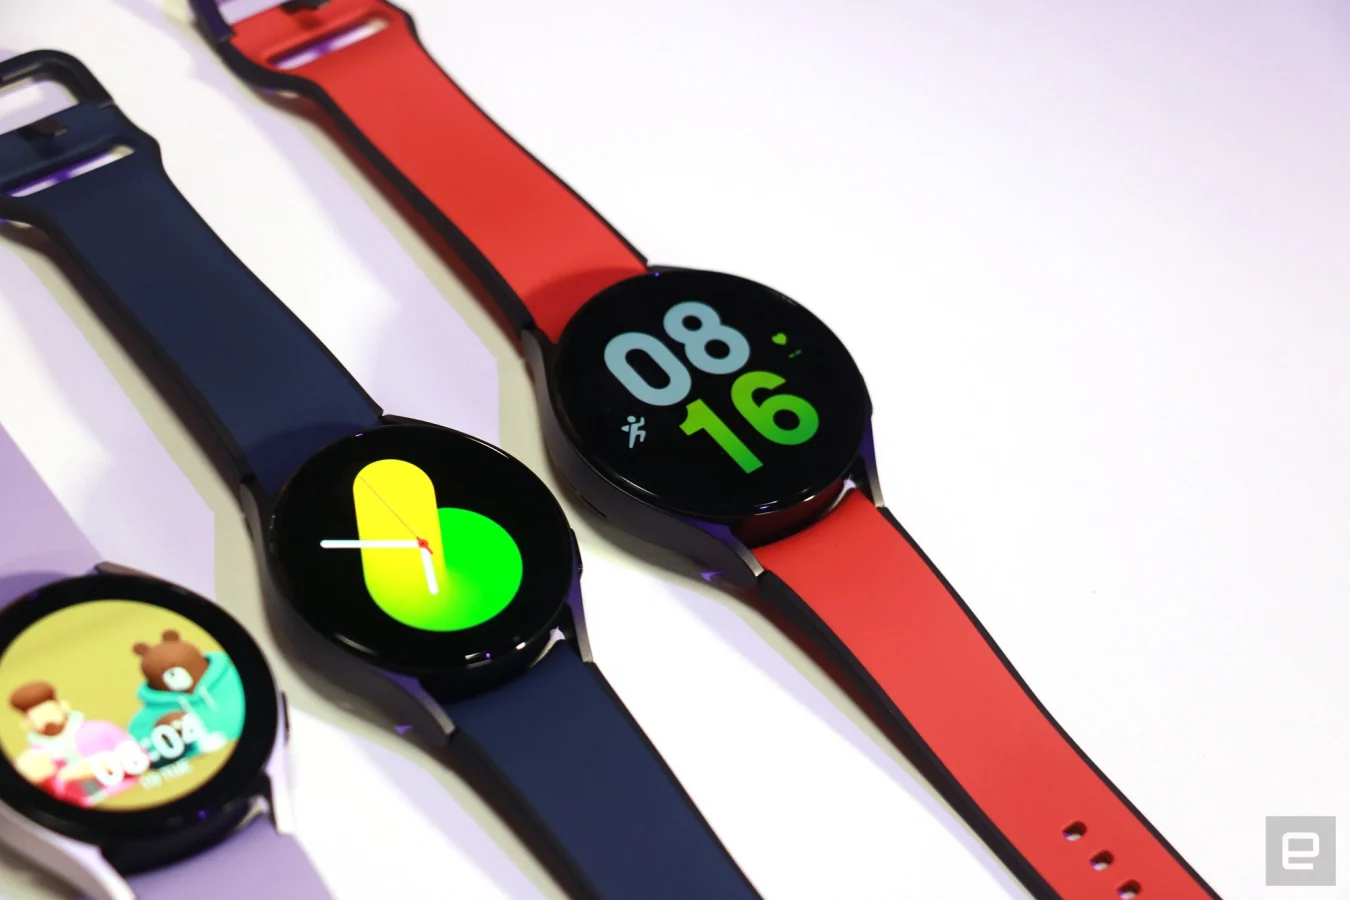 A trio of Galaxy Watch 5 units on a table, with purple, blue and red straps from left to right.